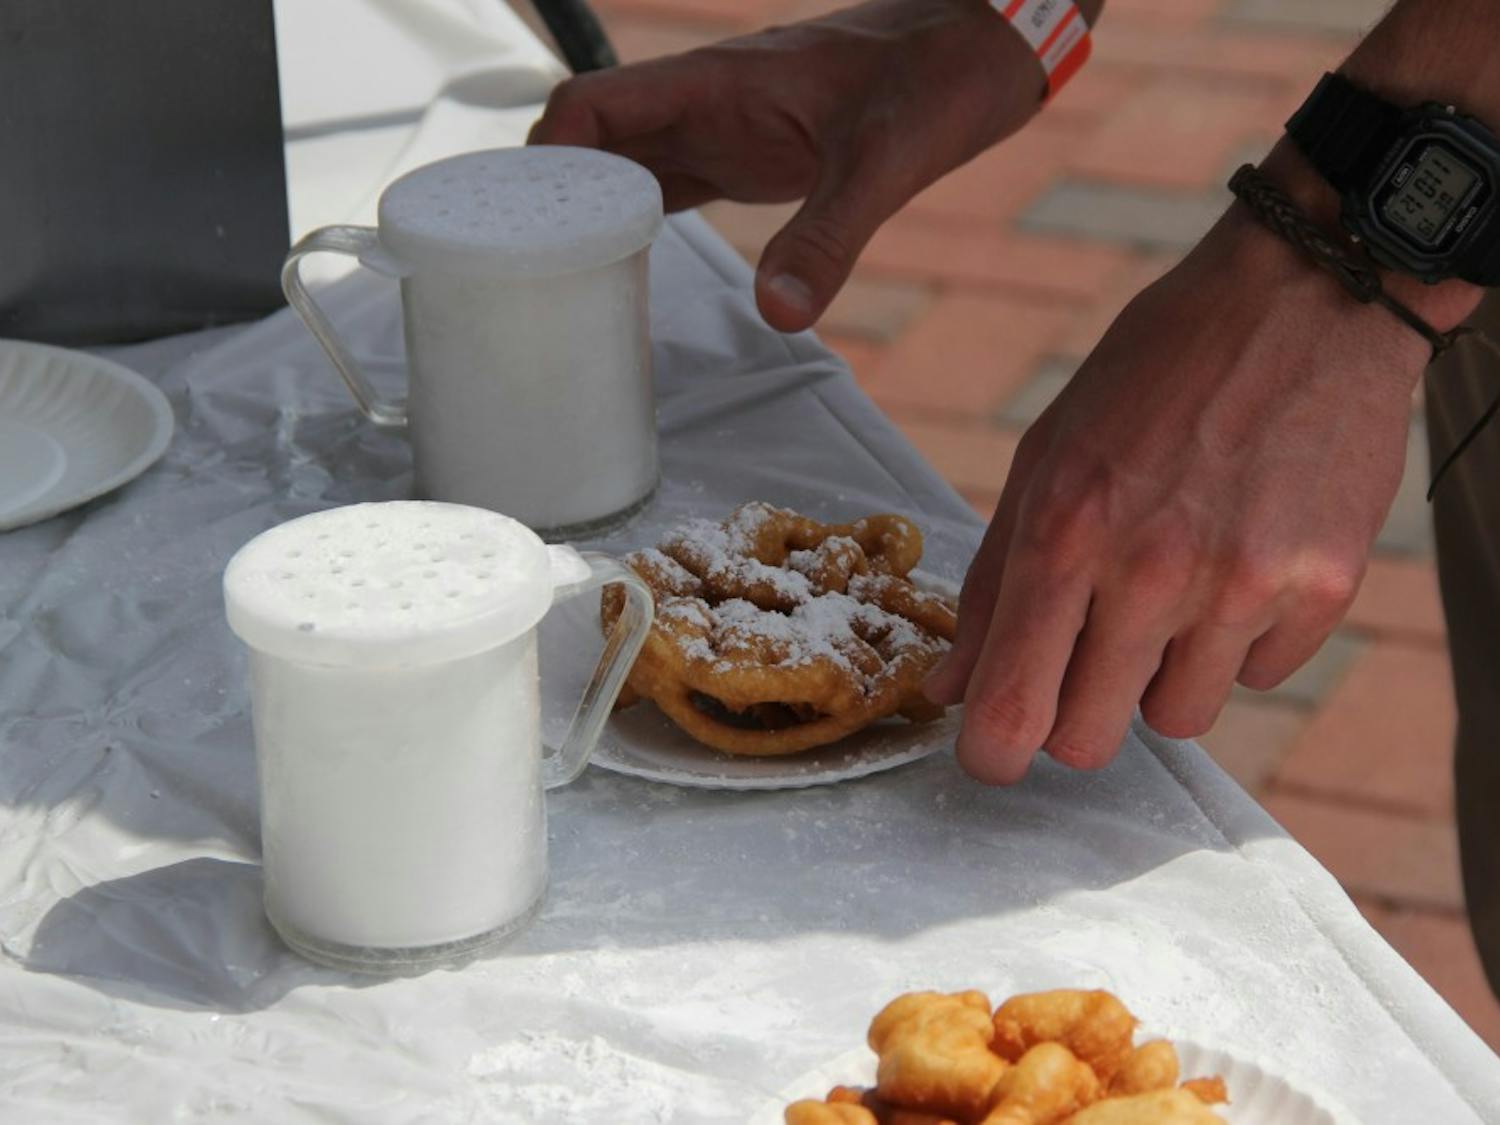 Delicious Funnel Cake at the UPC Spring Fling,&nbsp;on Wednesday, April 19, 2017 in Auburn, Ala.